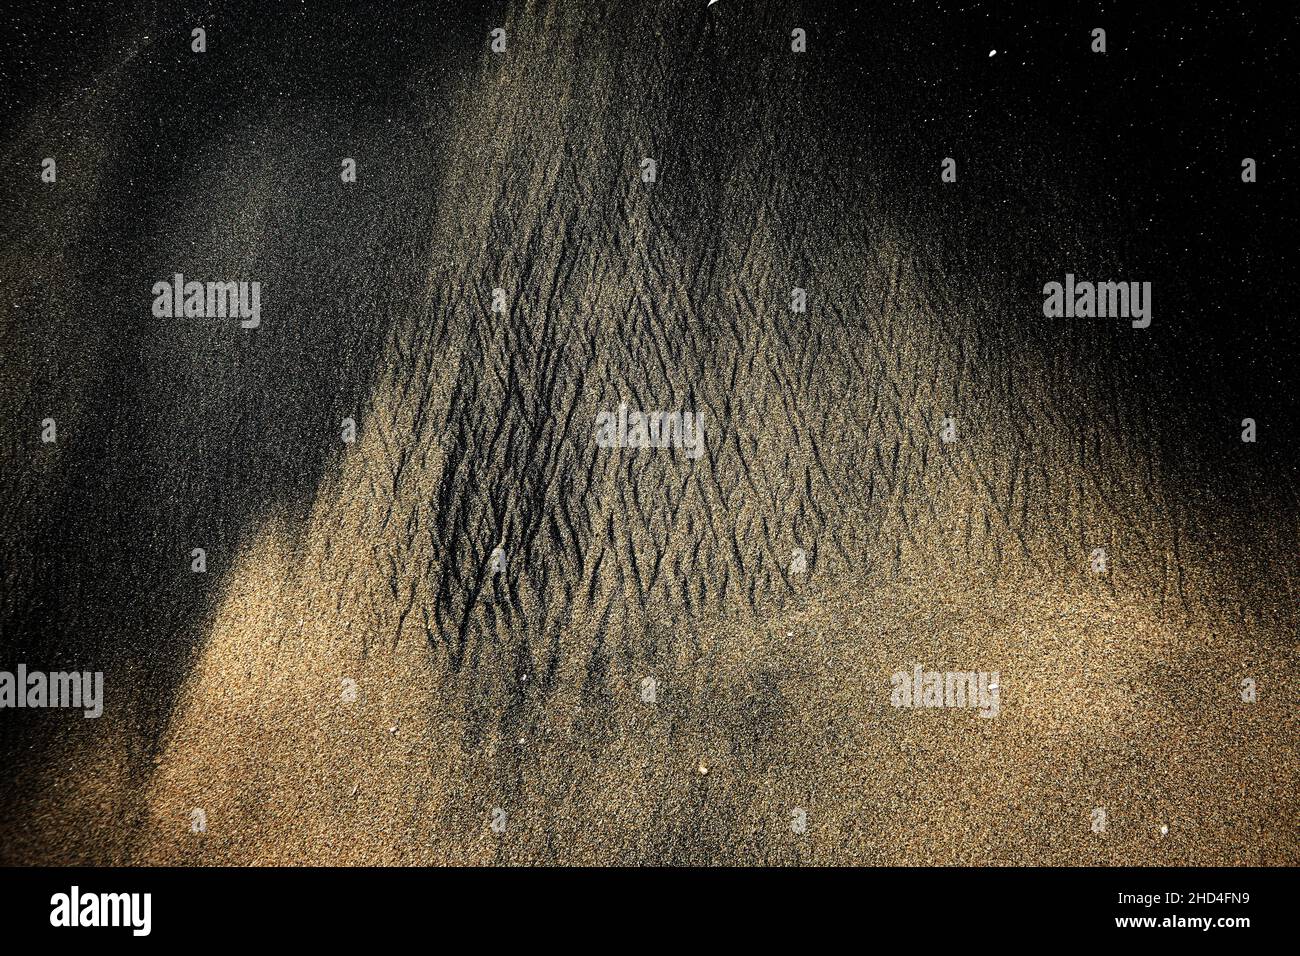 Black volcanic sand abstract pattern. Stock Photo